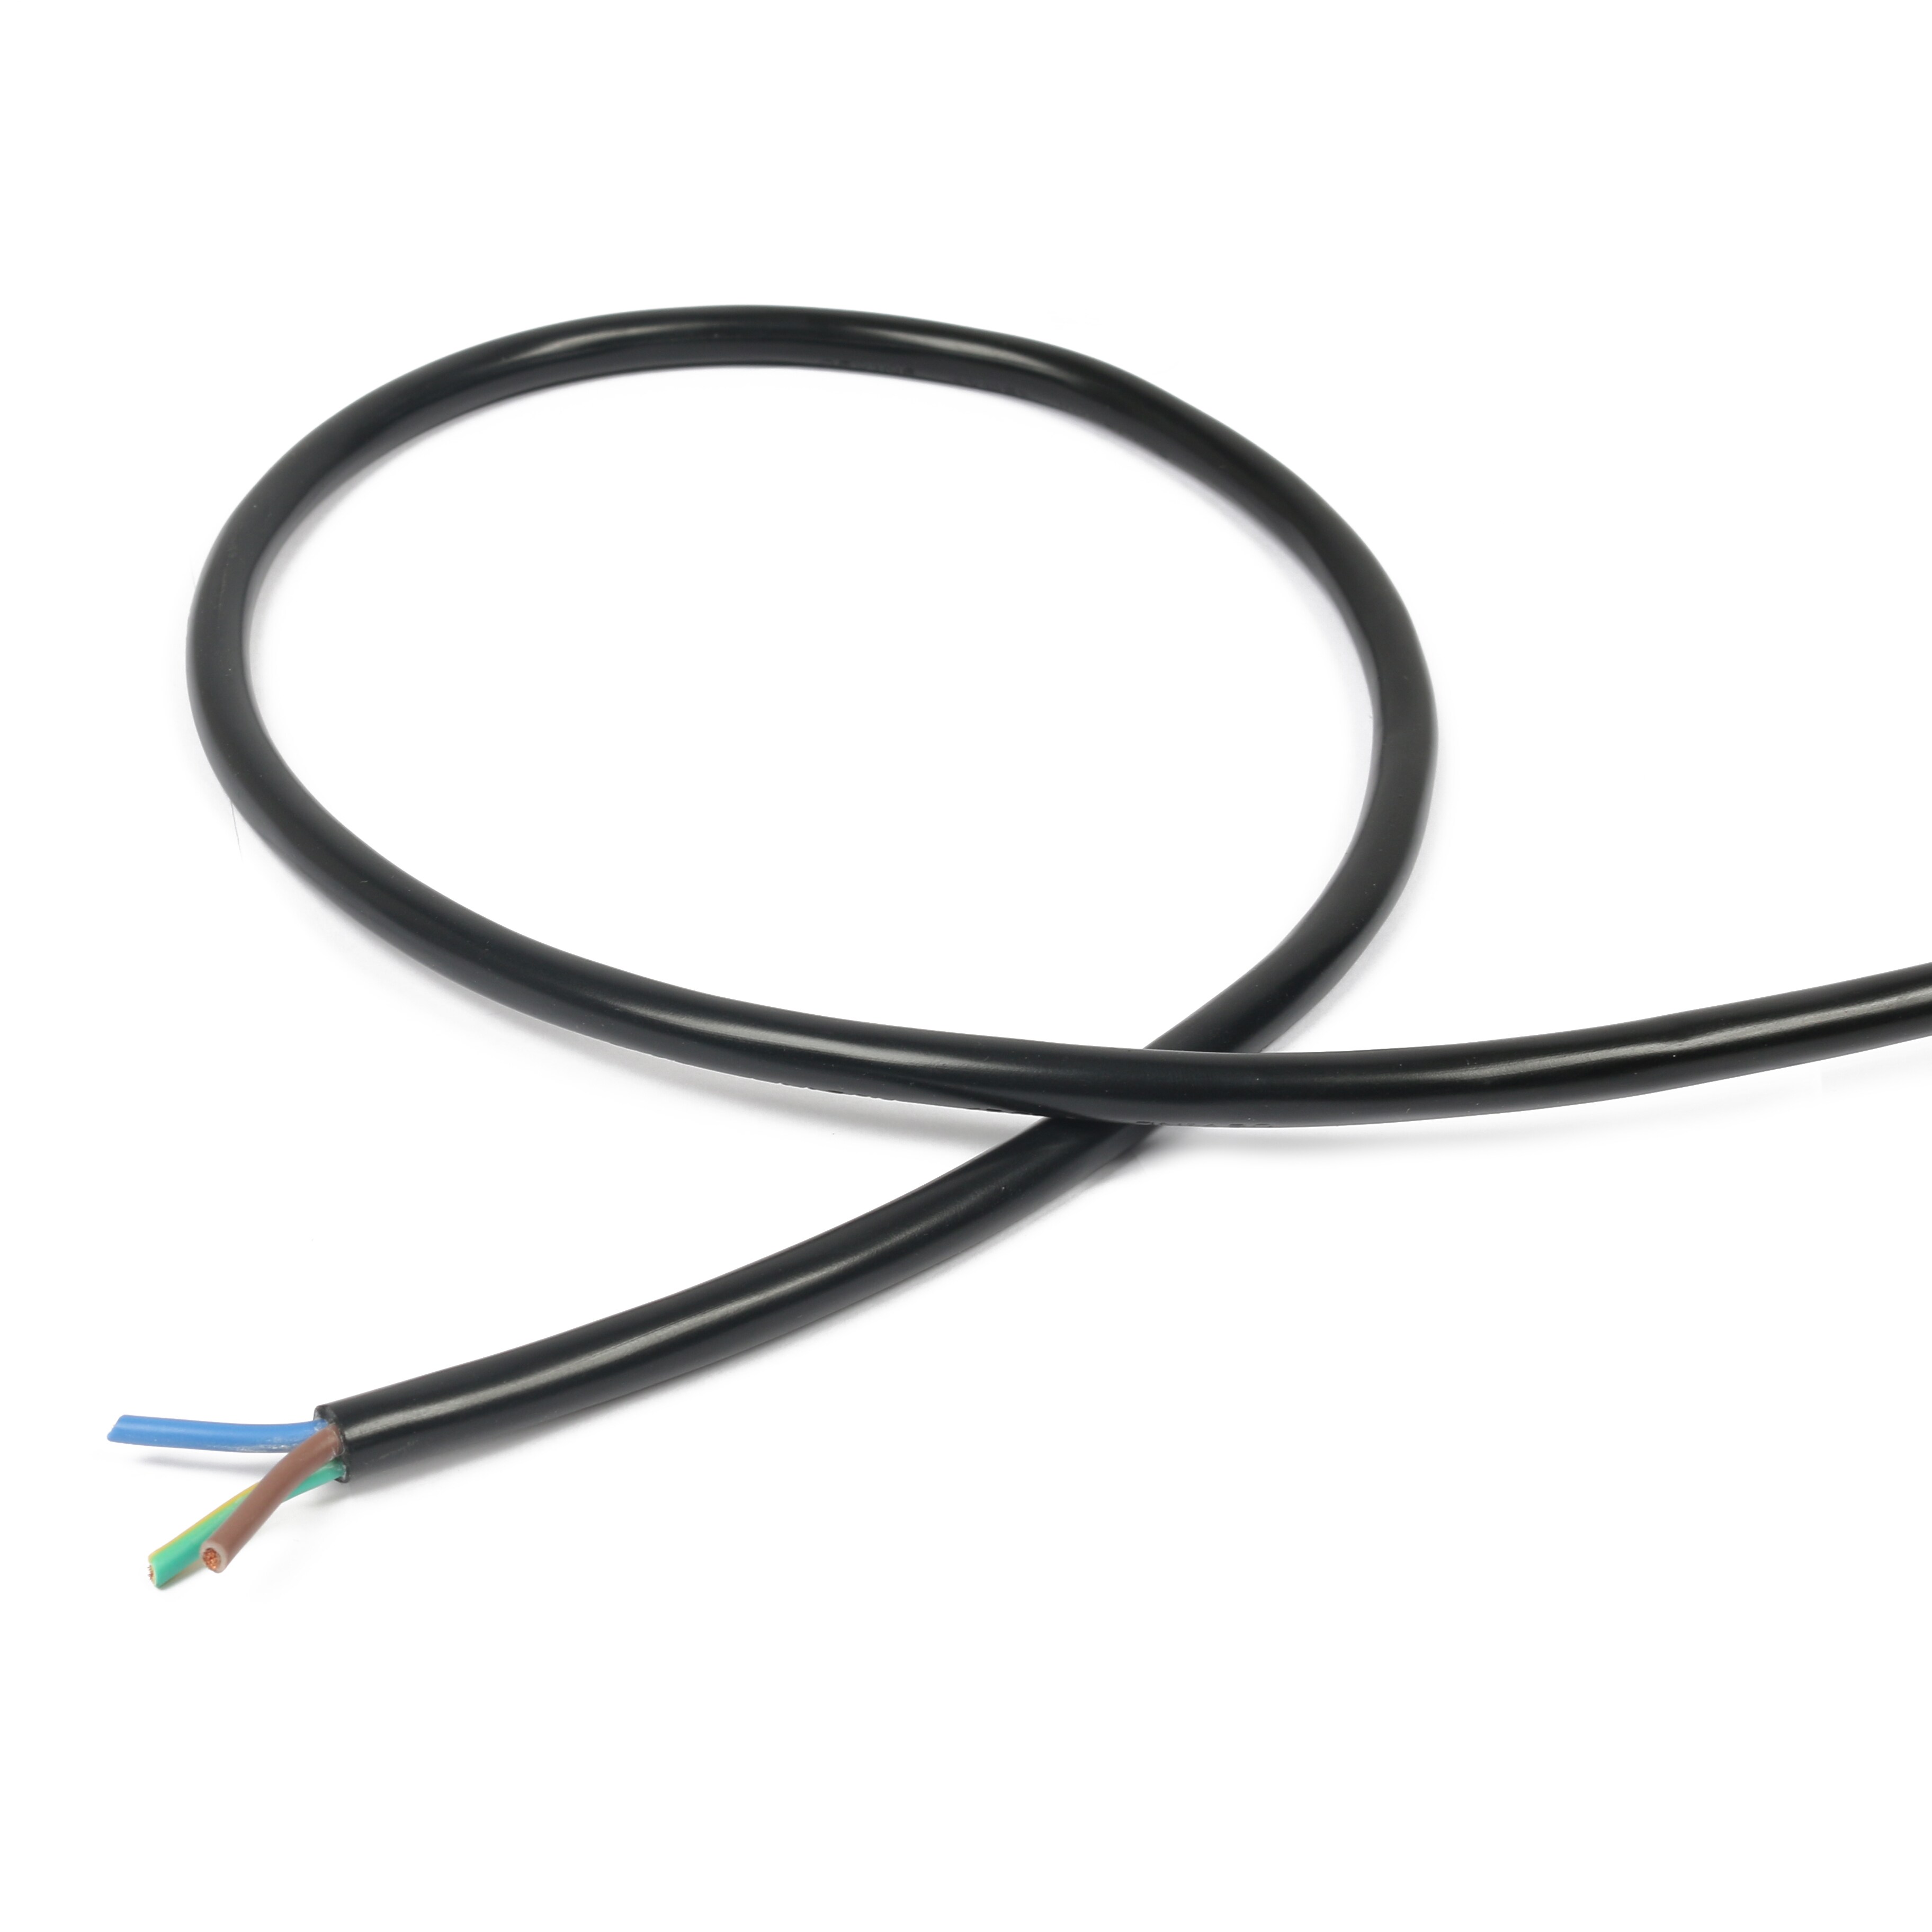 Power Cable - PC25R